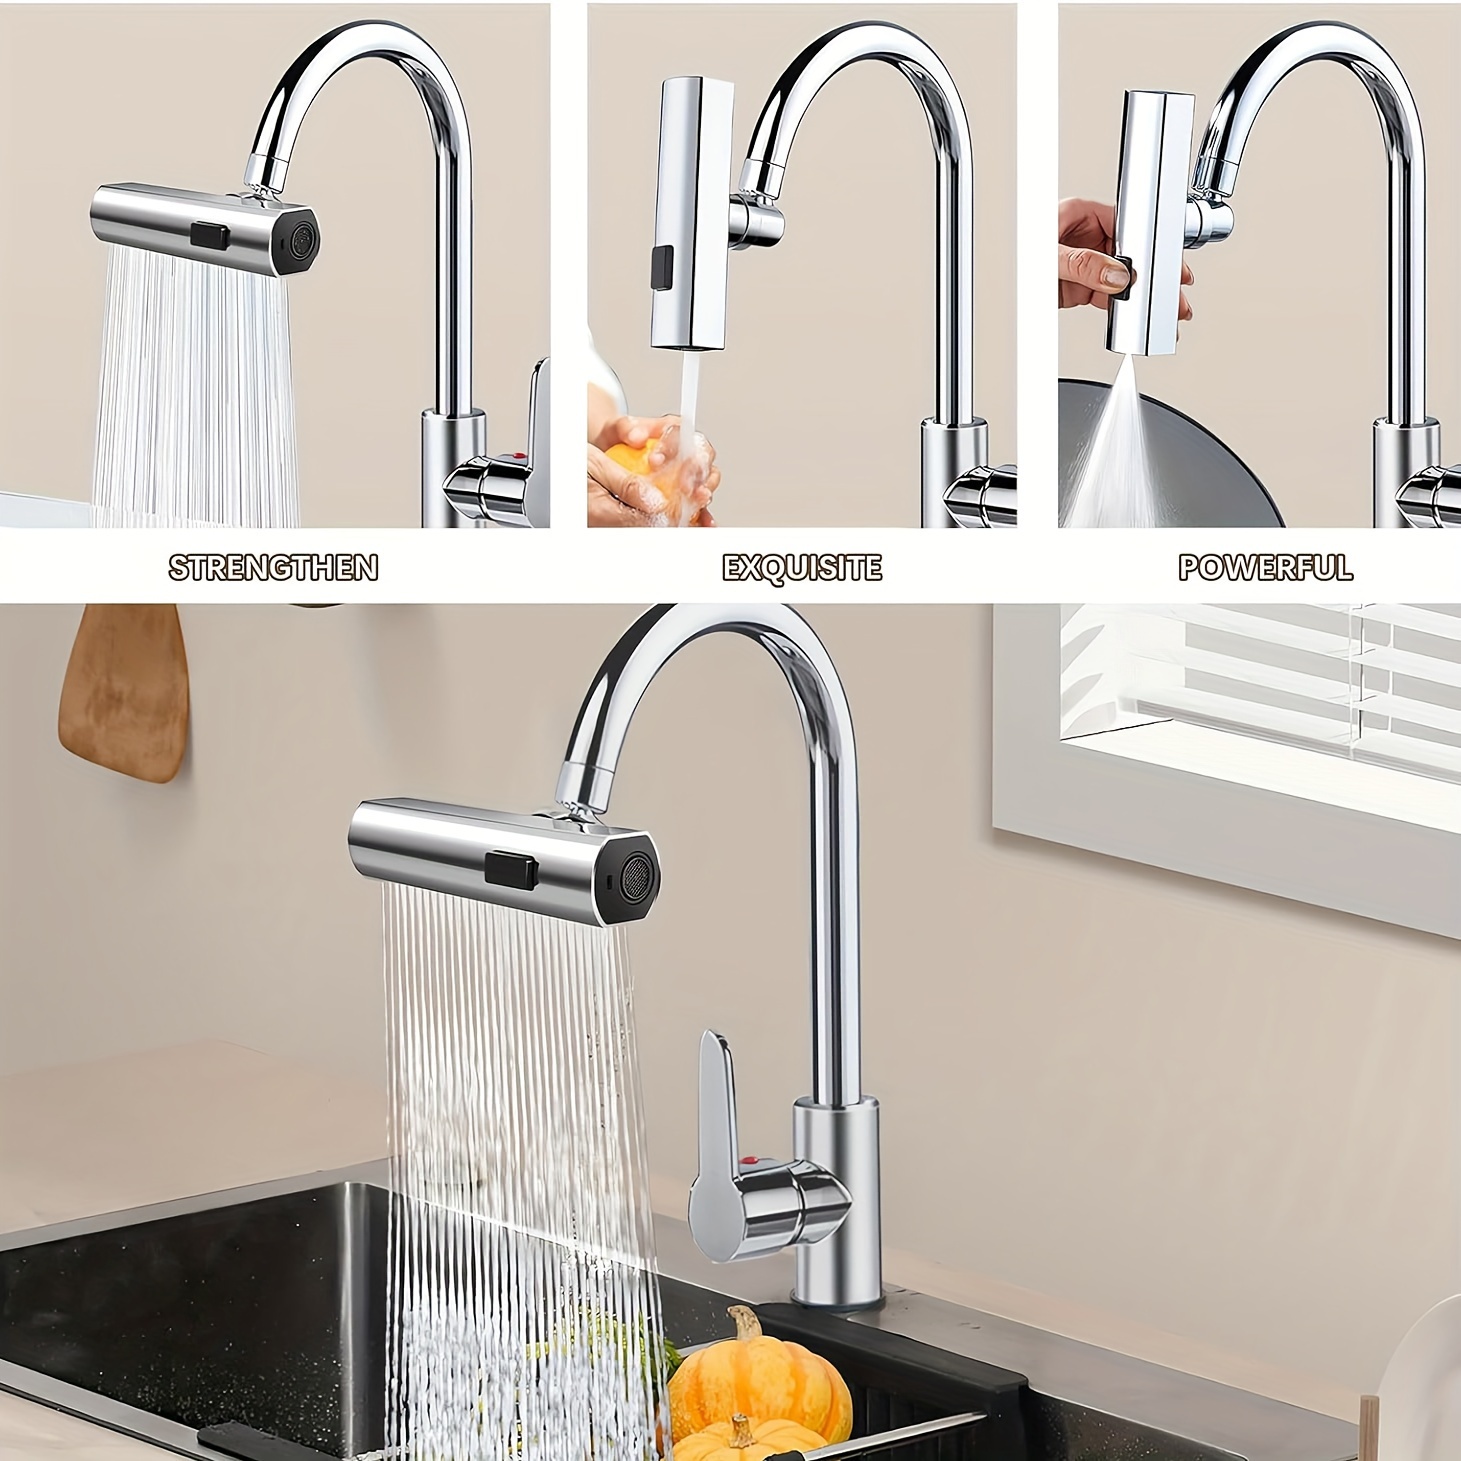 3 in 1 360° Waterfall Kitchen Faucet, Touch Kitchen Faucets, Faucet Extender for Kitchen Sink, Swivel Waterfall Kitchen Faucet for Washing Vegetable Fruit details 5